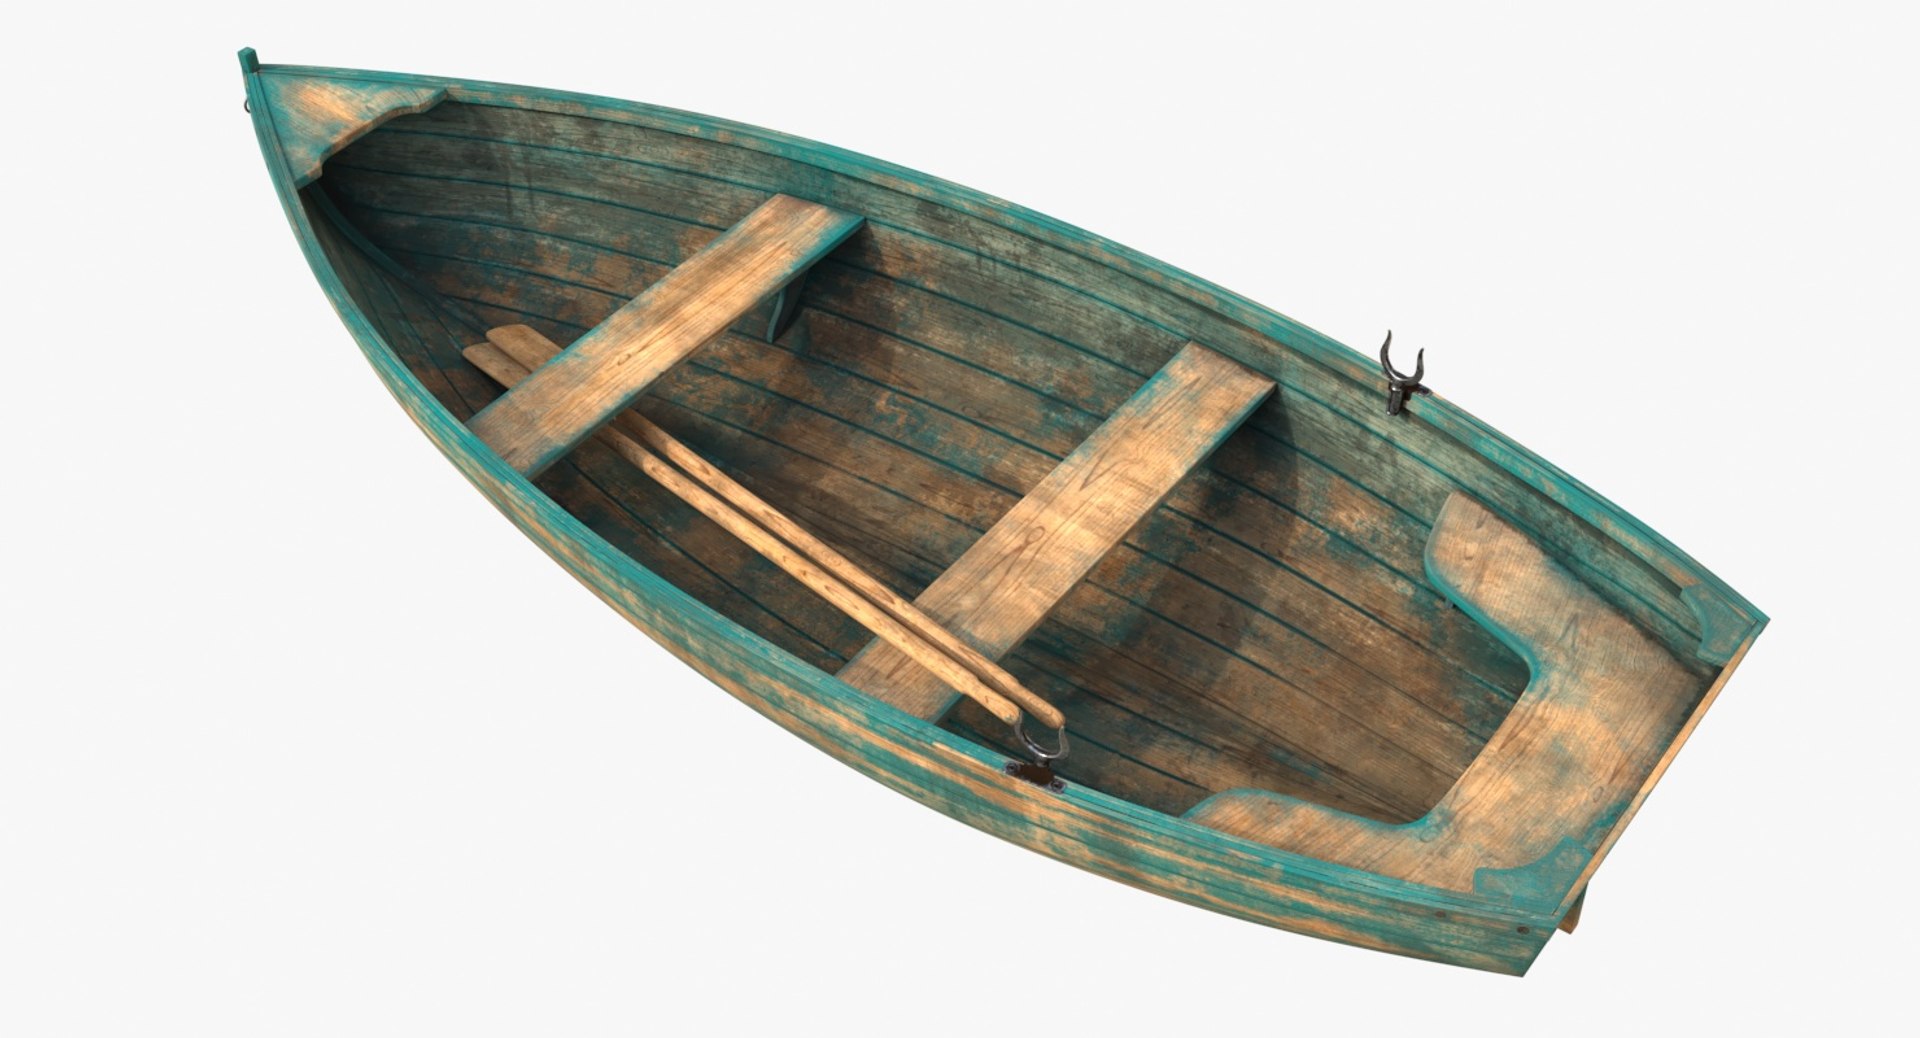 Old Fishing Wooden Boat 3D Rendering. Small Wooden Empty Rowing